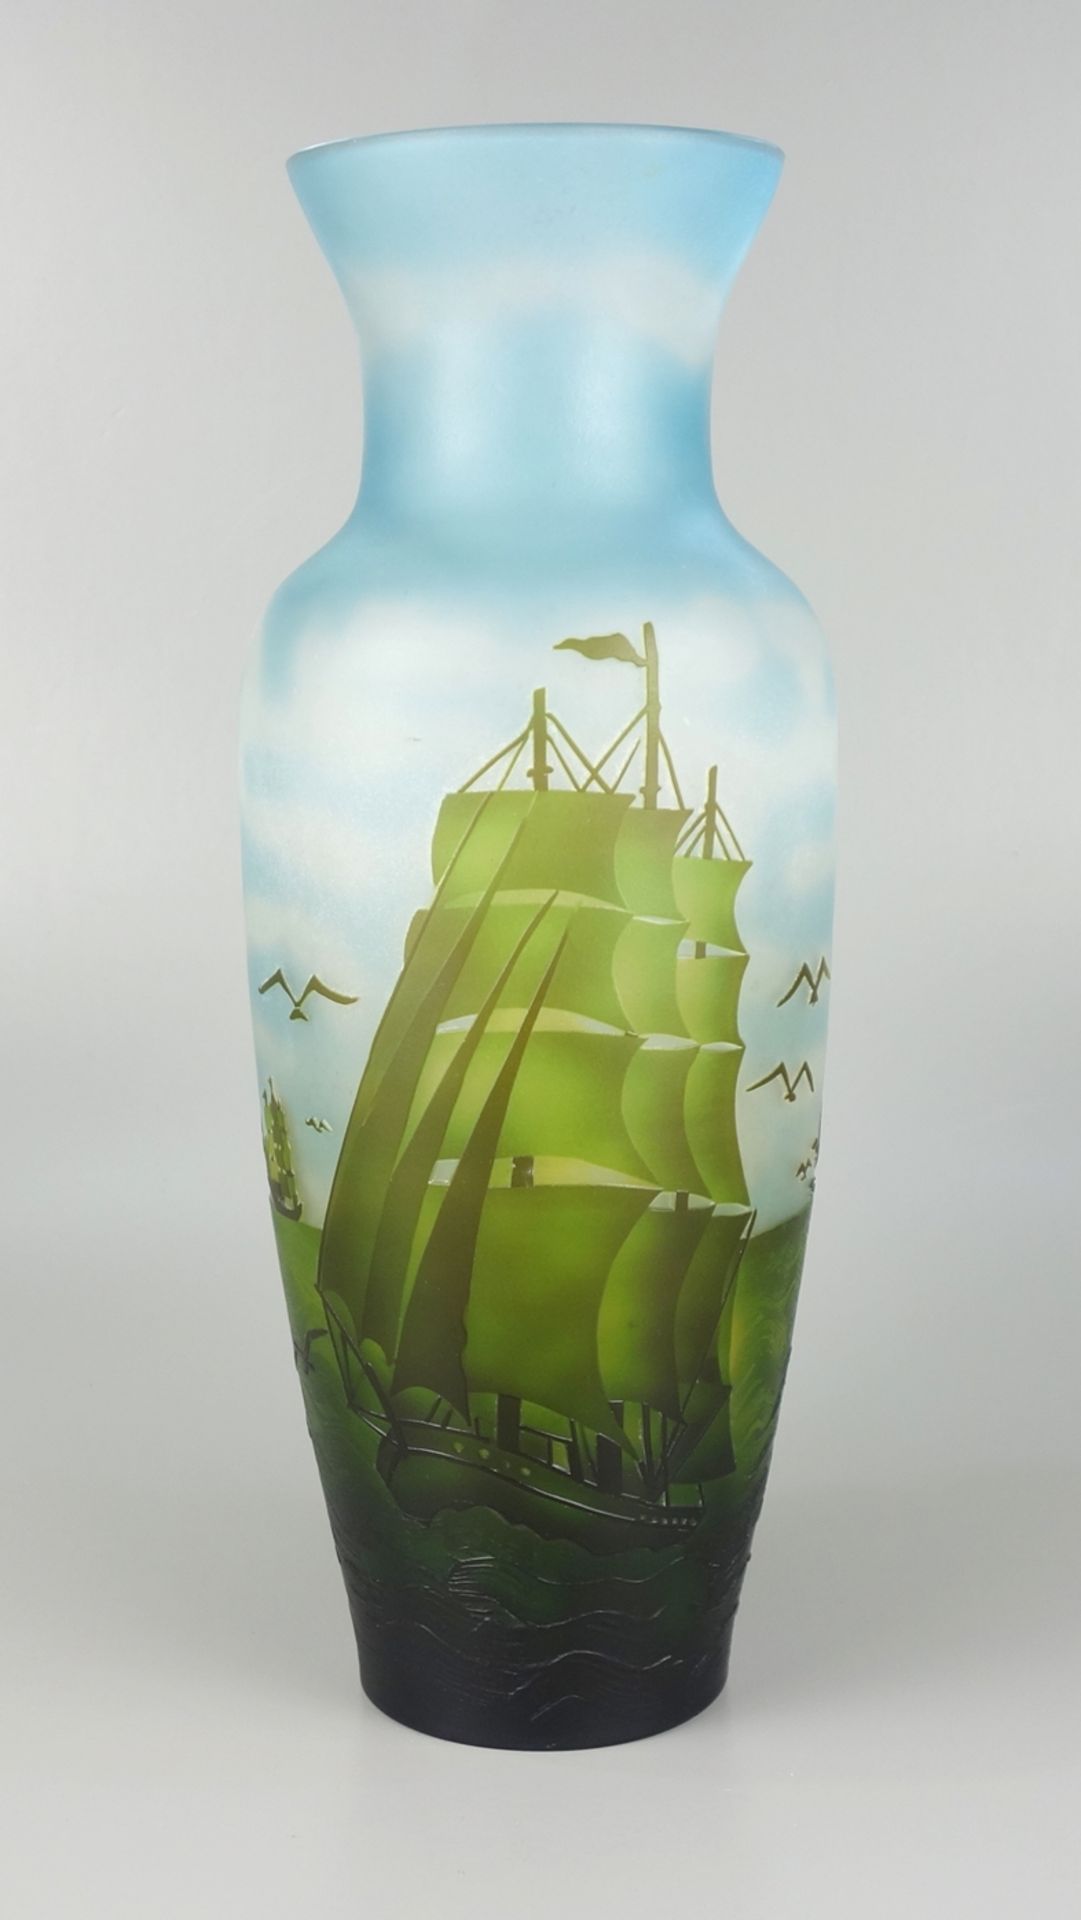 large vase, cameo glass with maritime scene, 20th c.